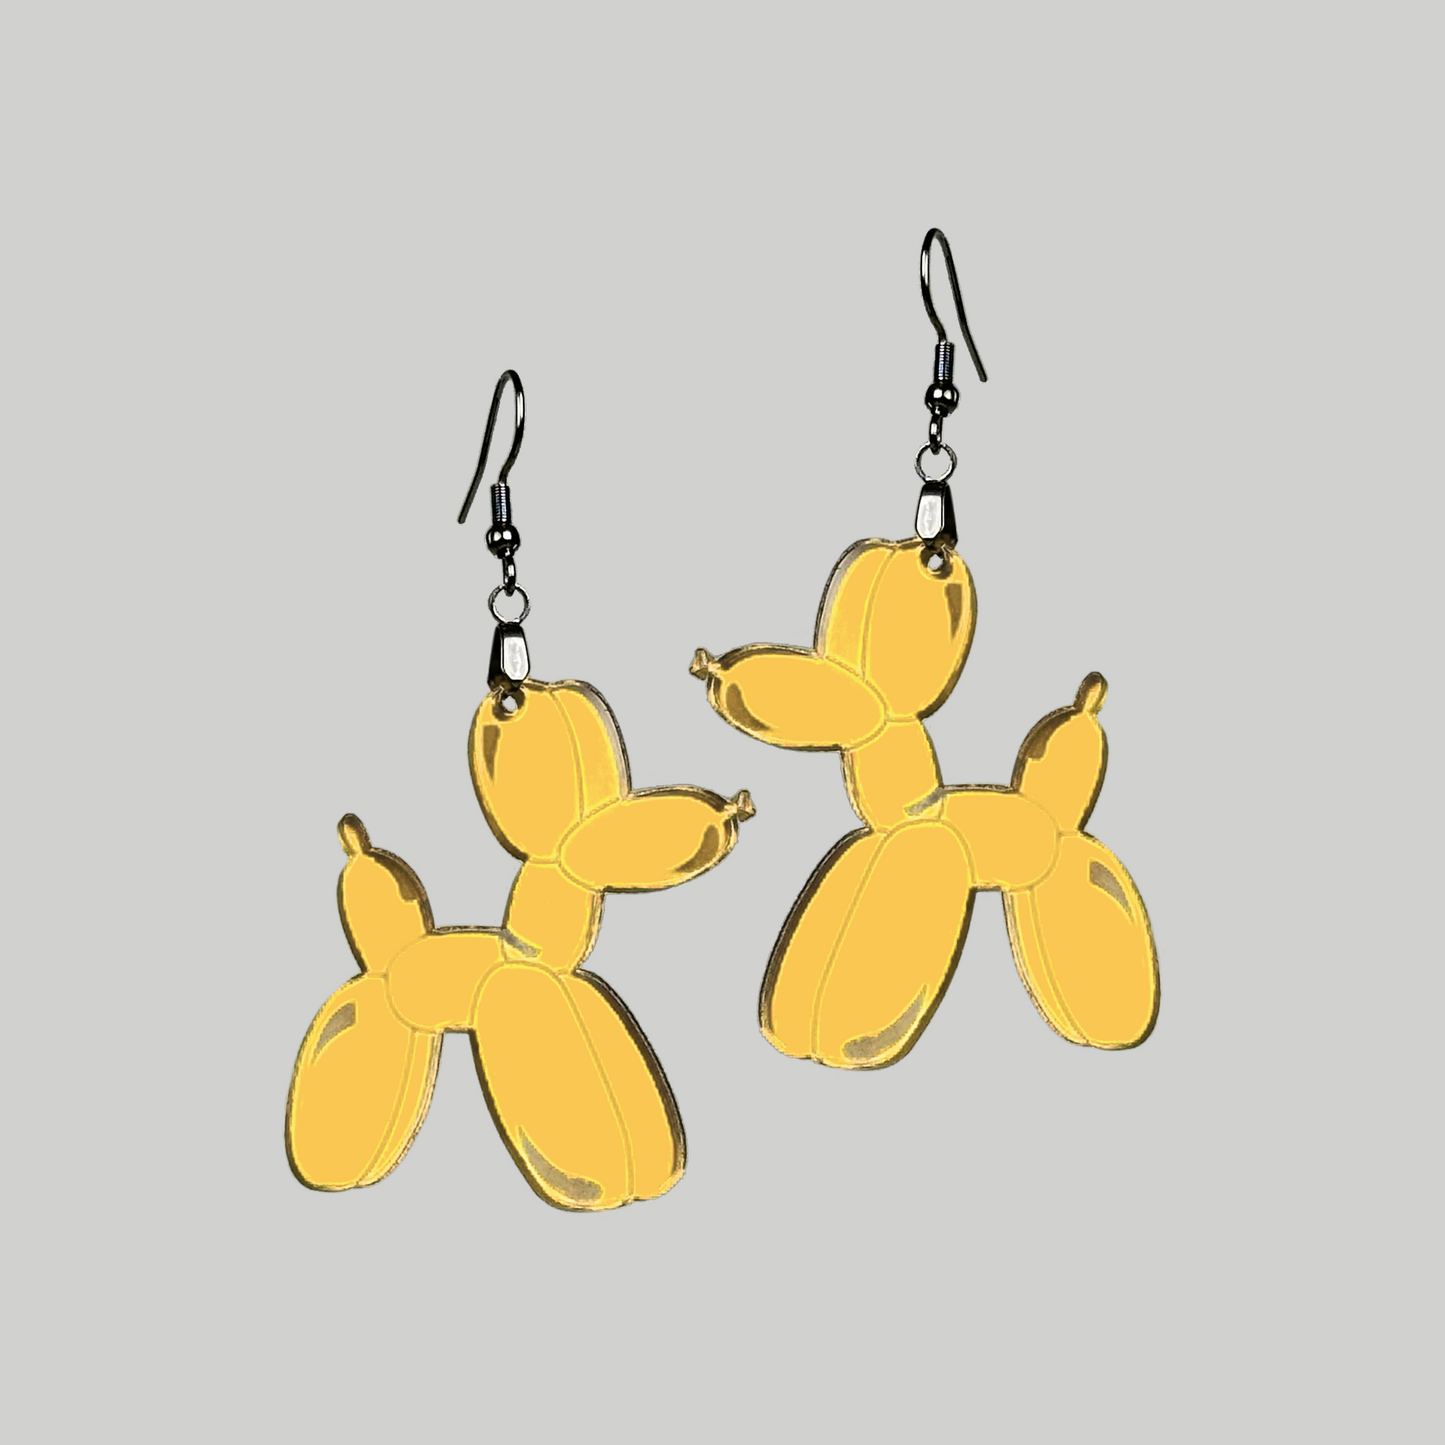 Adorable dog-shaped balloon animal earrings, adding a touch of fun and innocence to your fashion statement.